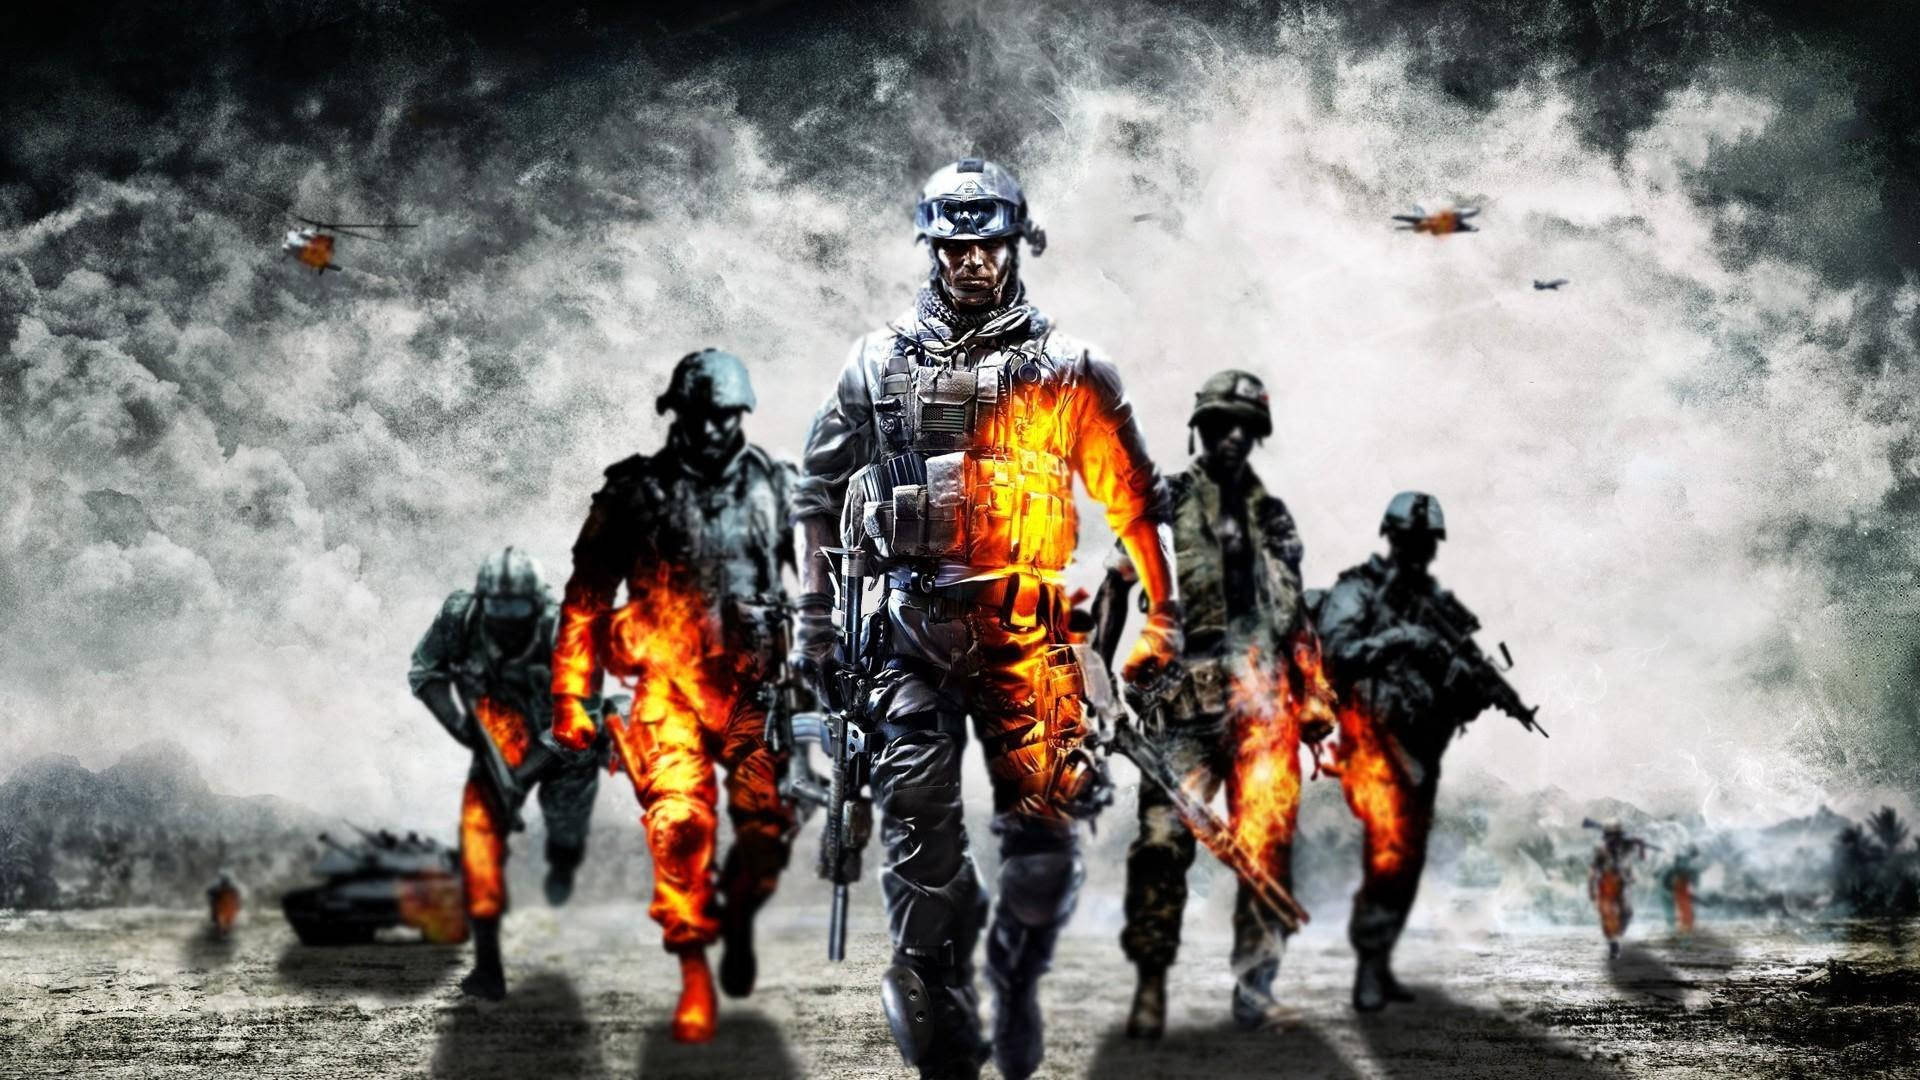 Cool Battlefield 3 Shooting Video Game Soldiers With Smoke Wallpaper